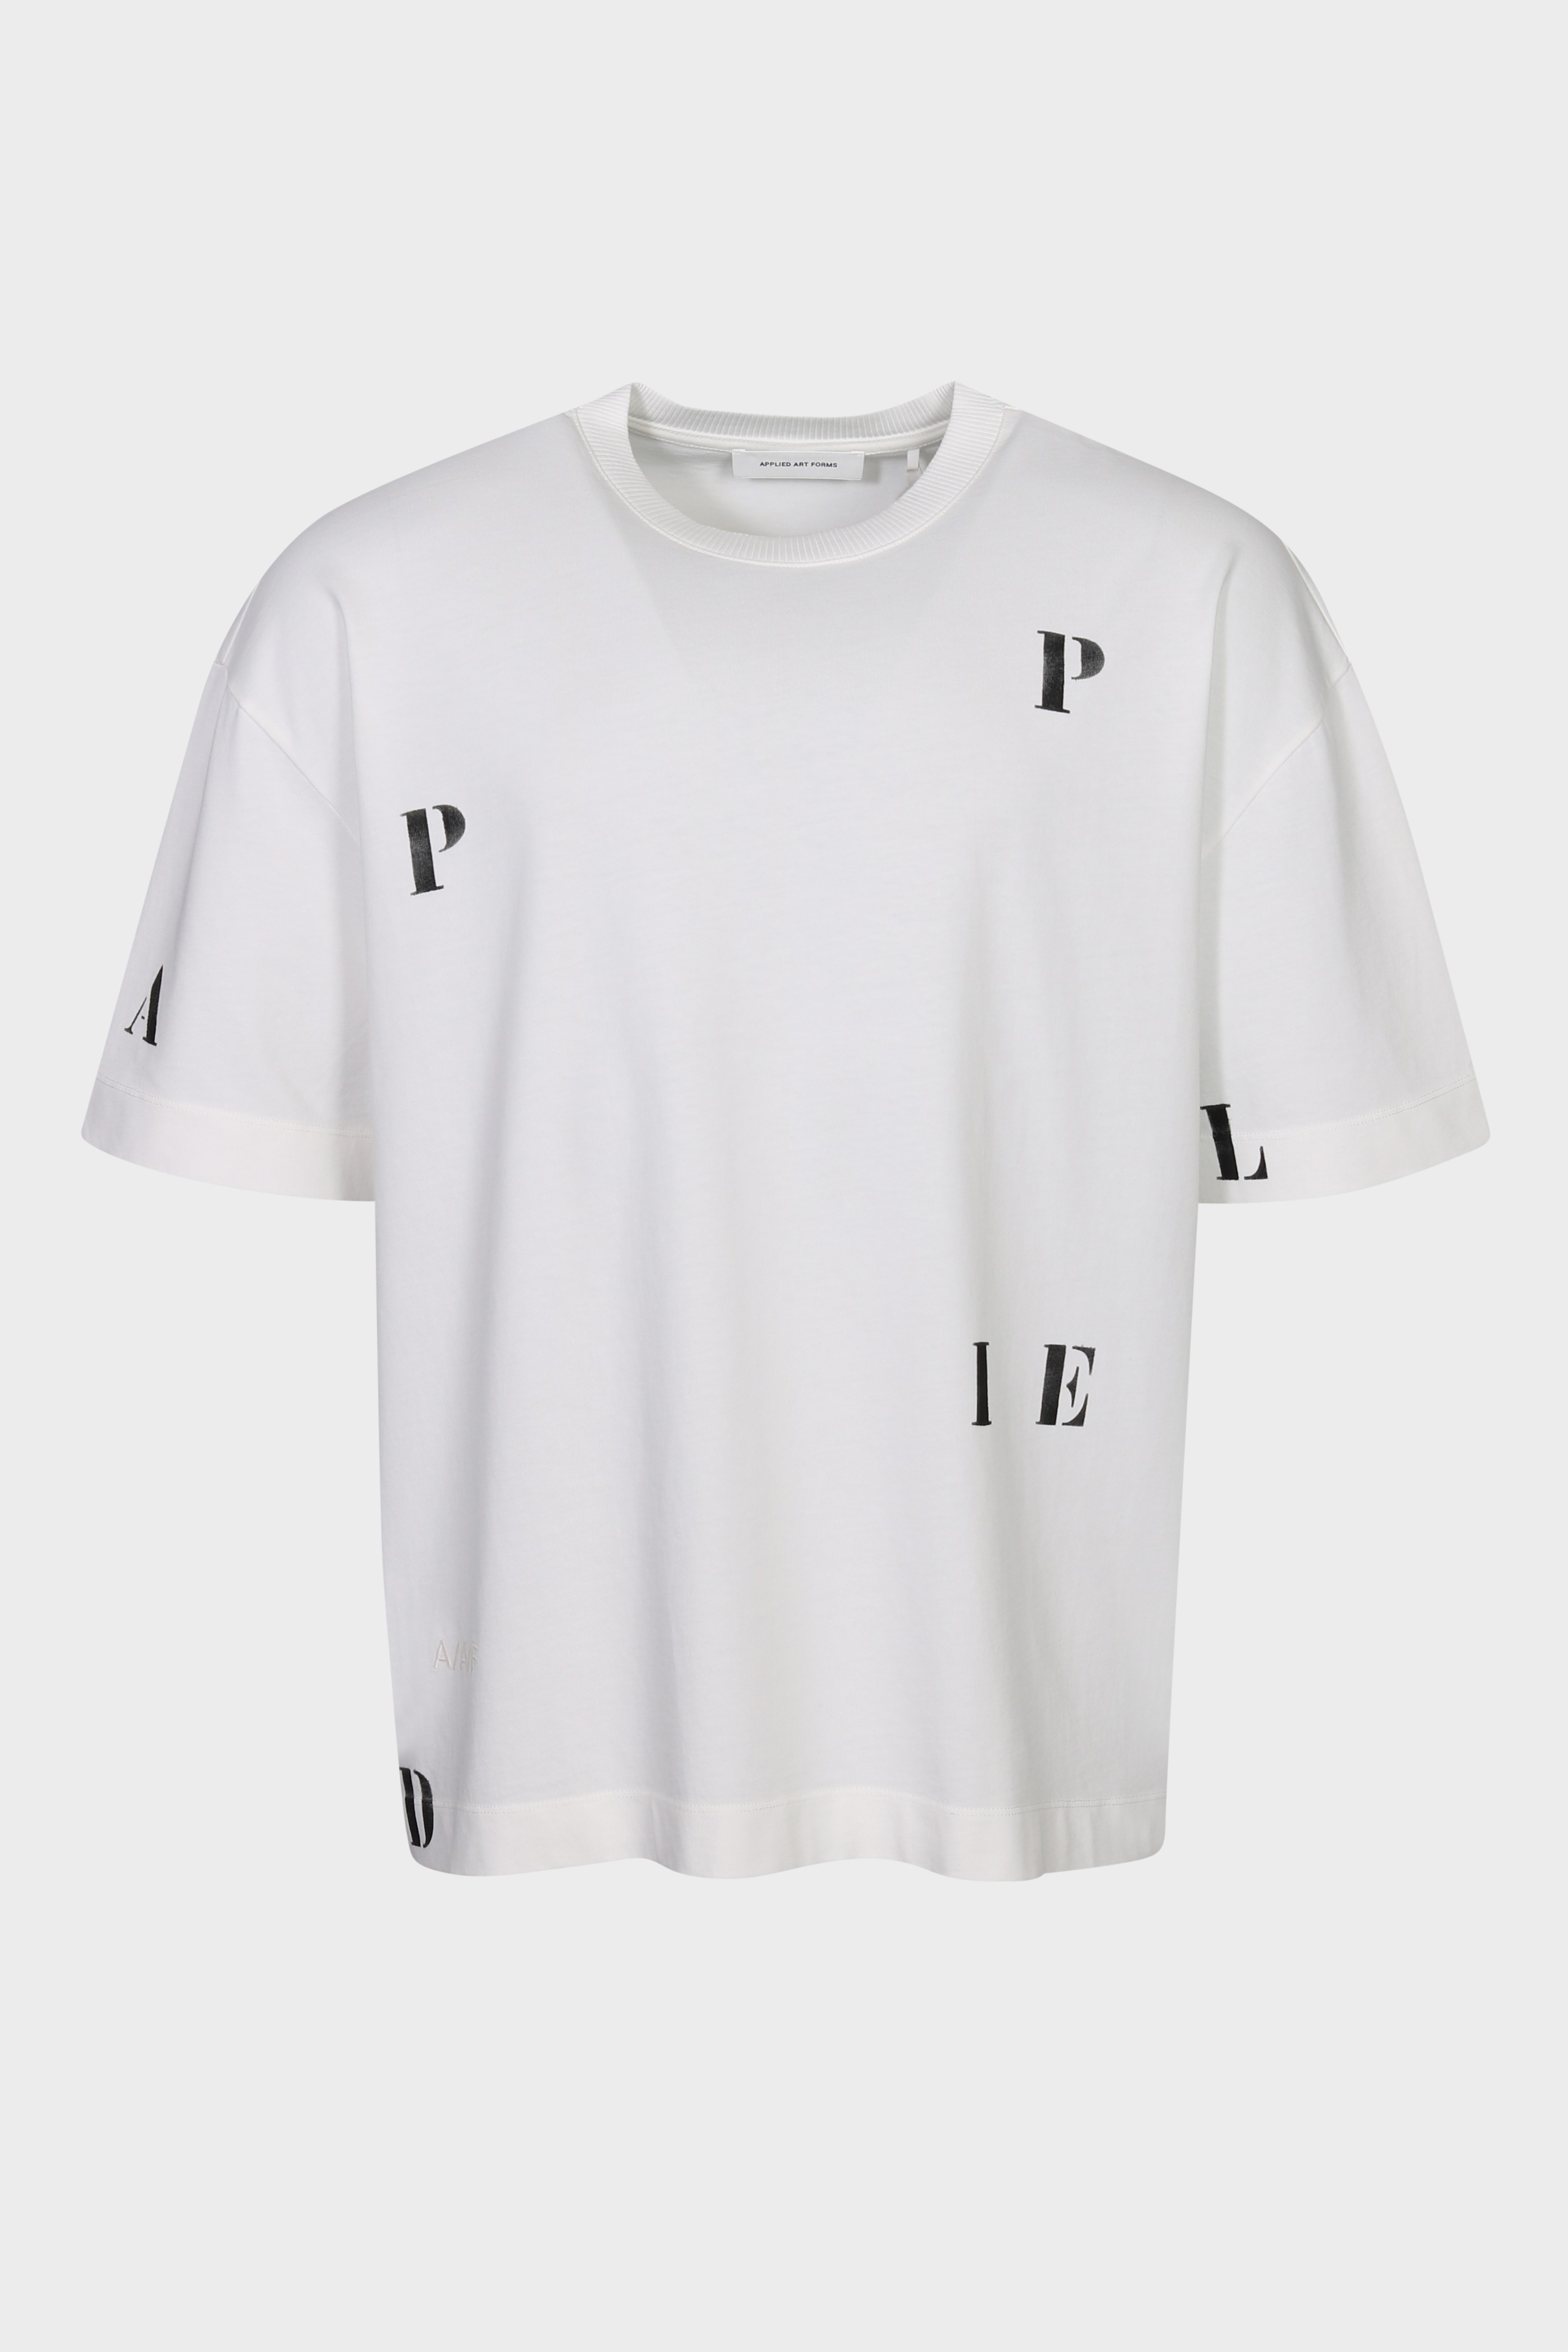 APPLIED ART FORMS Oversize T-Shirt Hand Stencilled Letters in Ecru